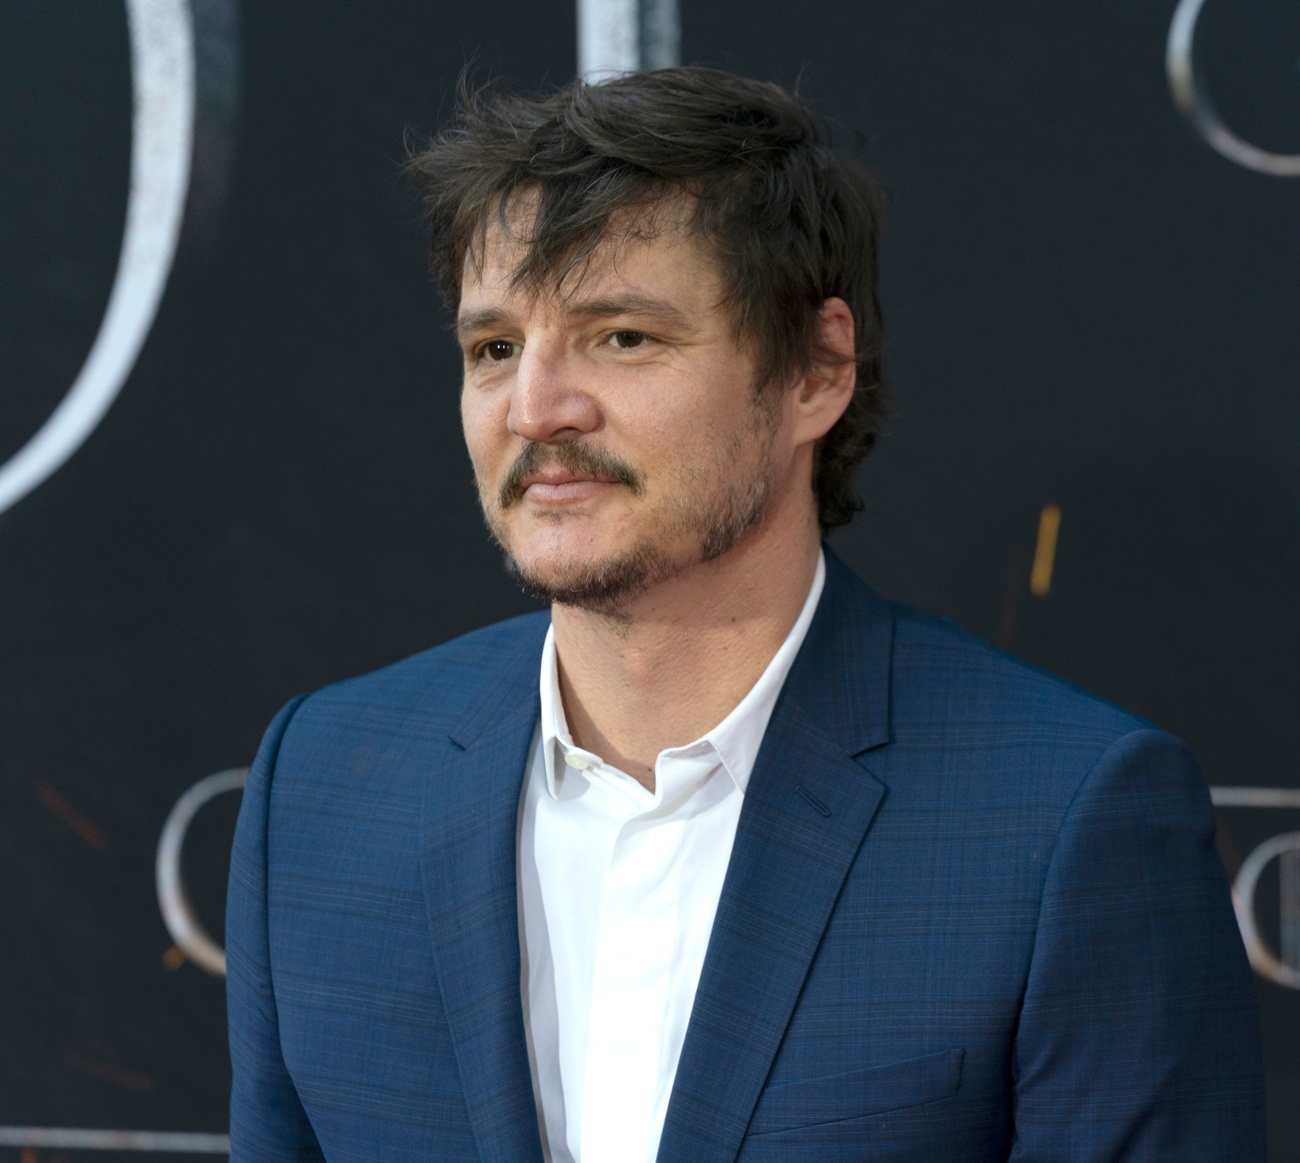 Rare Event: Pedro Pascal Suffers Eye Infection from Fan Emulating Iconic ‘Game of Thrones’ Scene